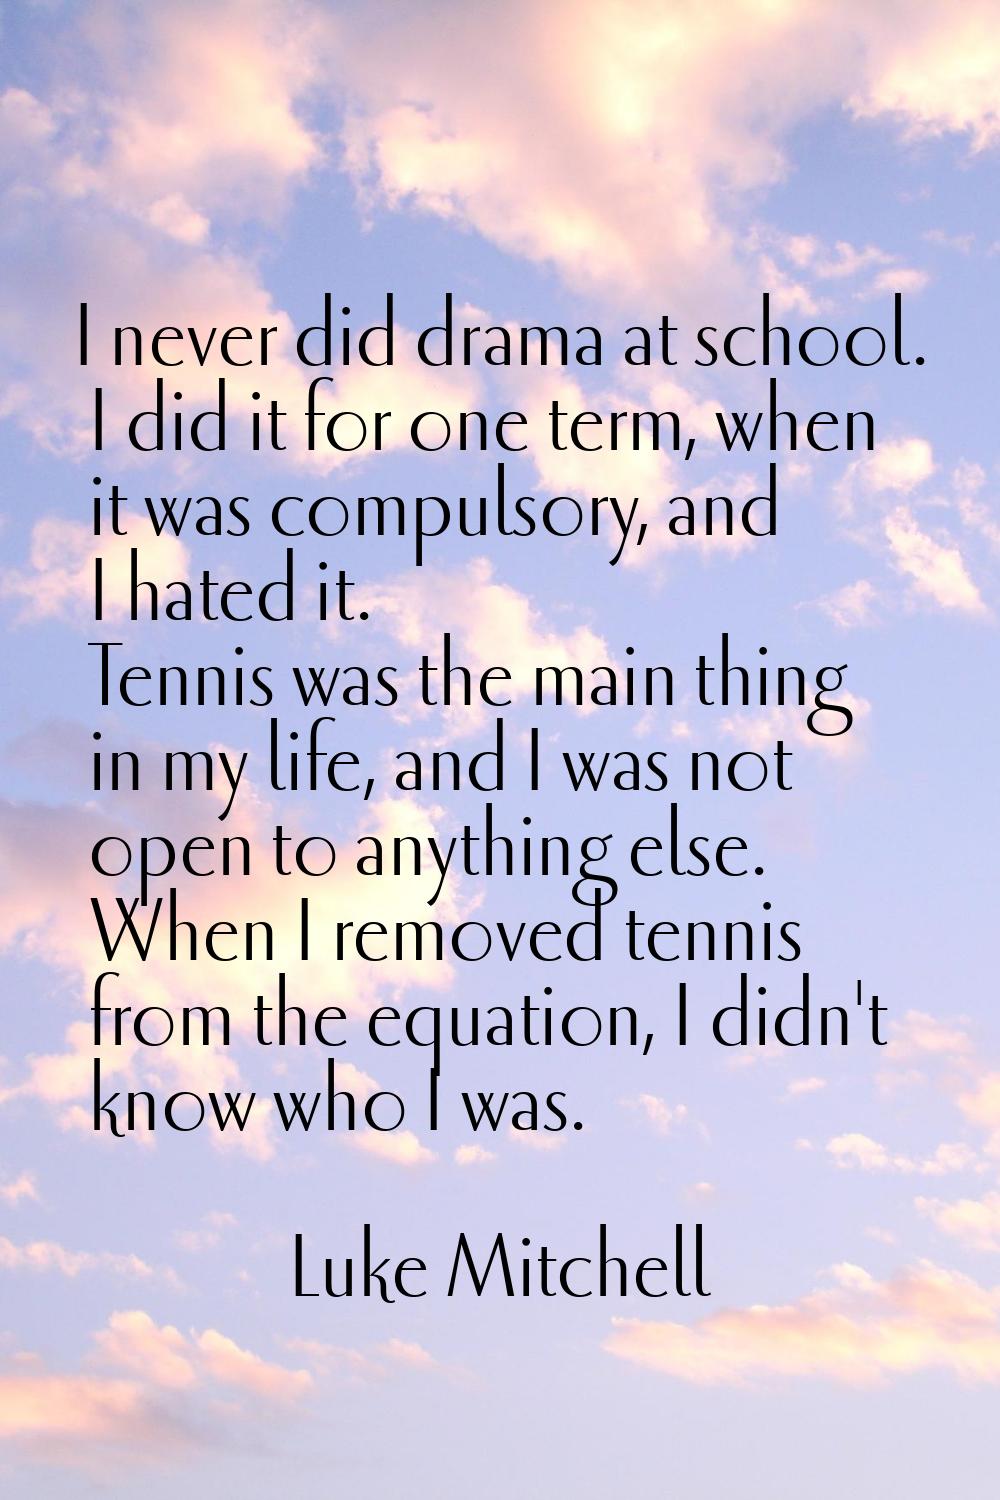 I never did drama at school. I did it for one term, when it was compulsory, and I hated it. Tennis 